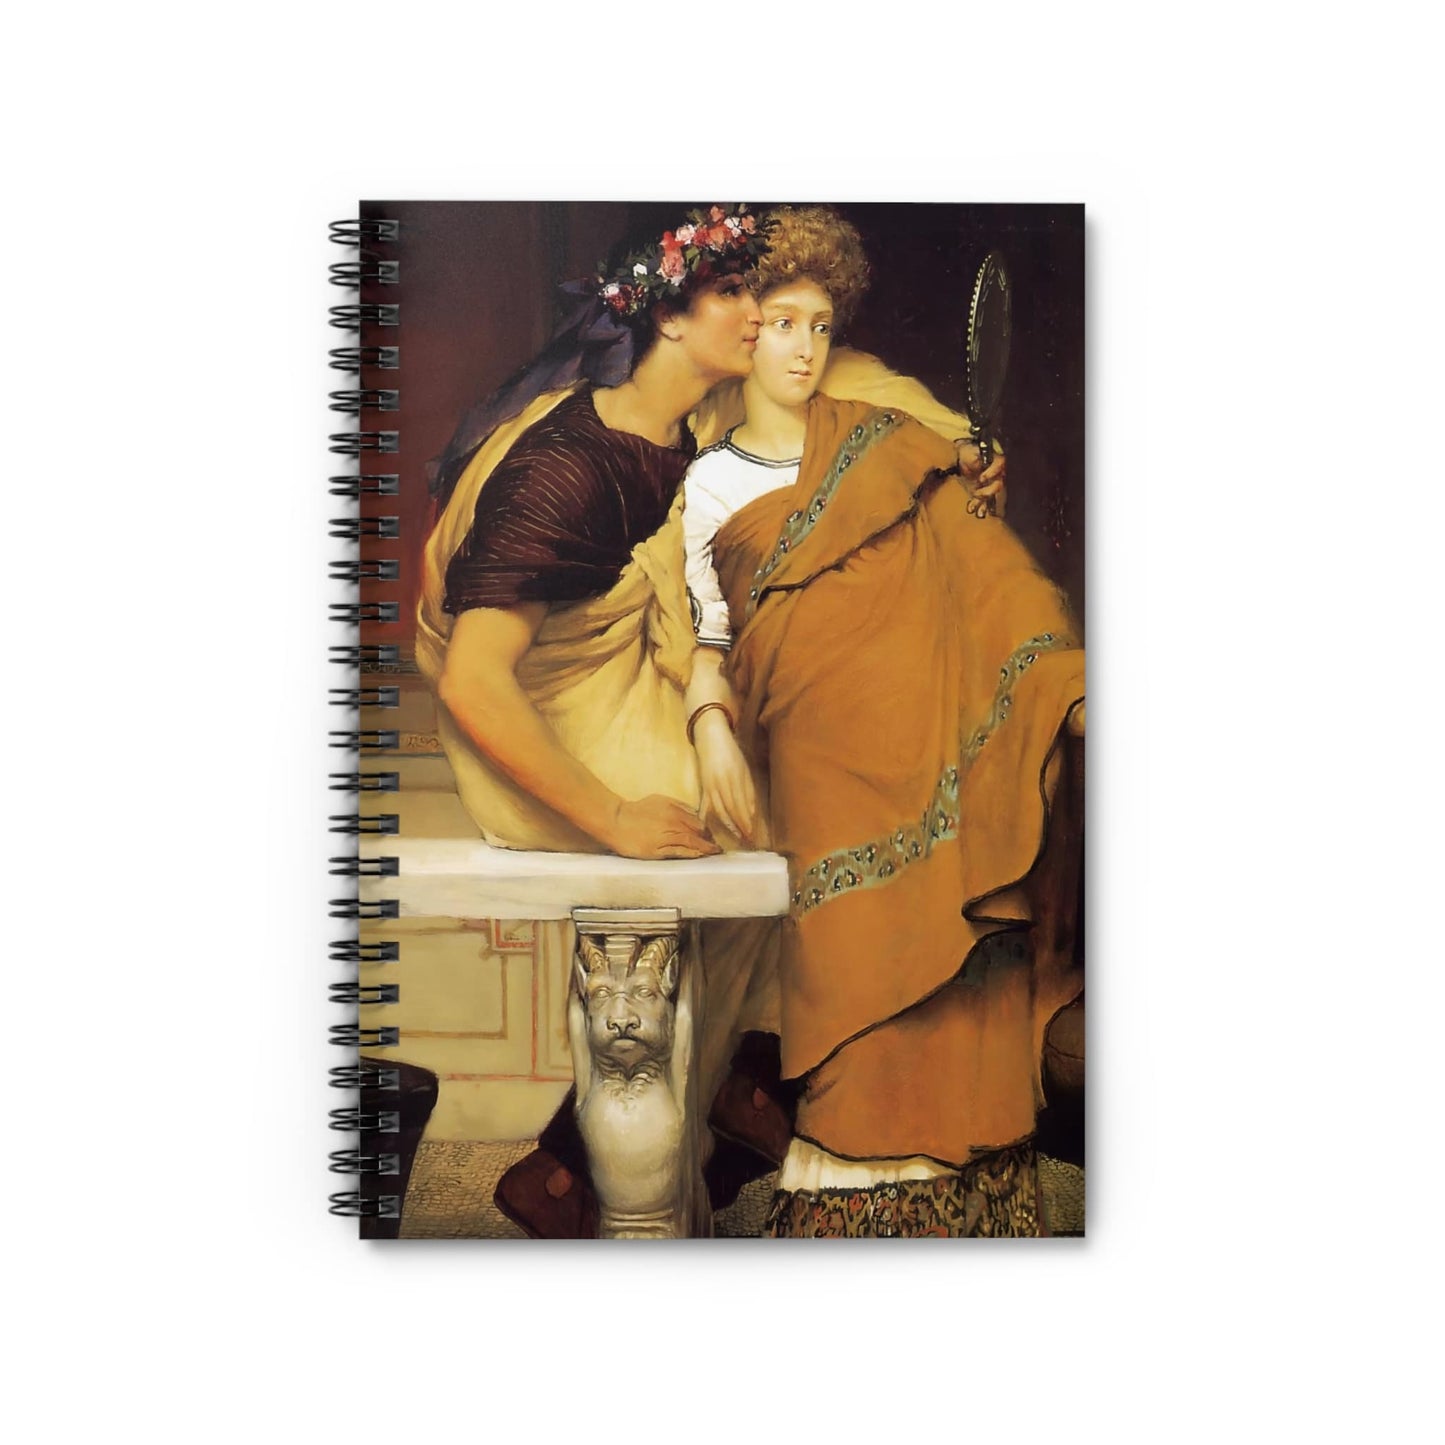 Renaissance Youth Notebook with Two Lovers cover, perfect for journaling and planning, featuring a Renaissance scene of two lovers.